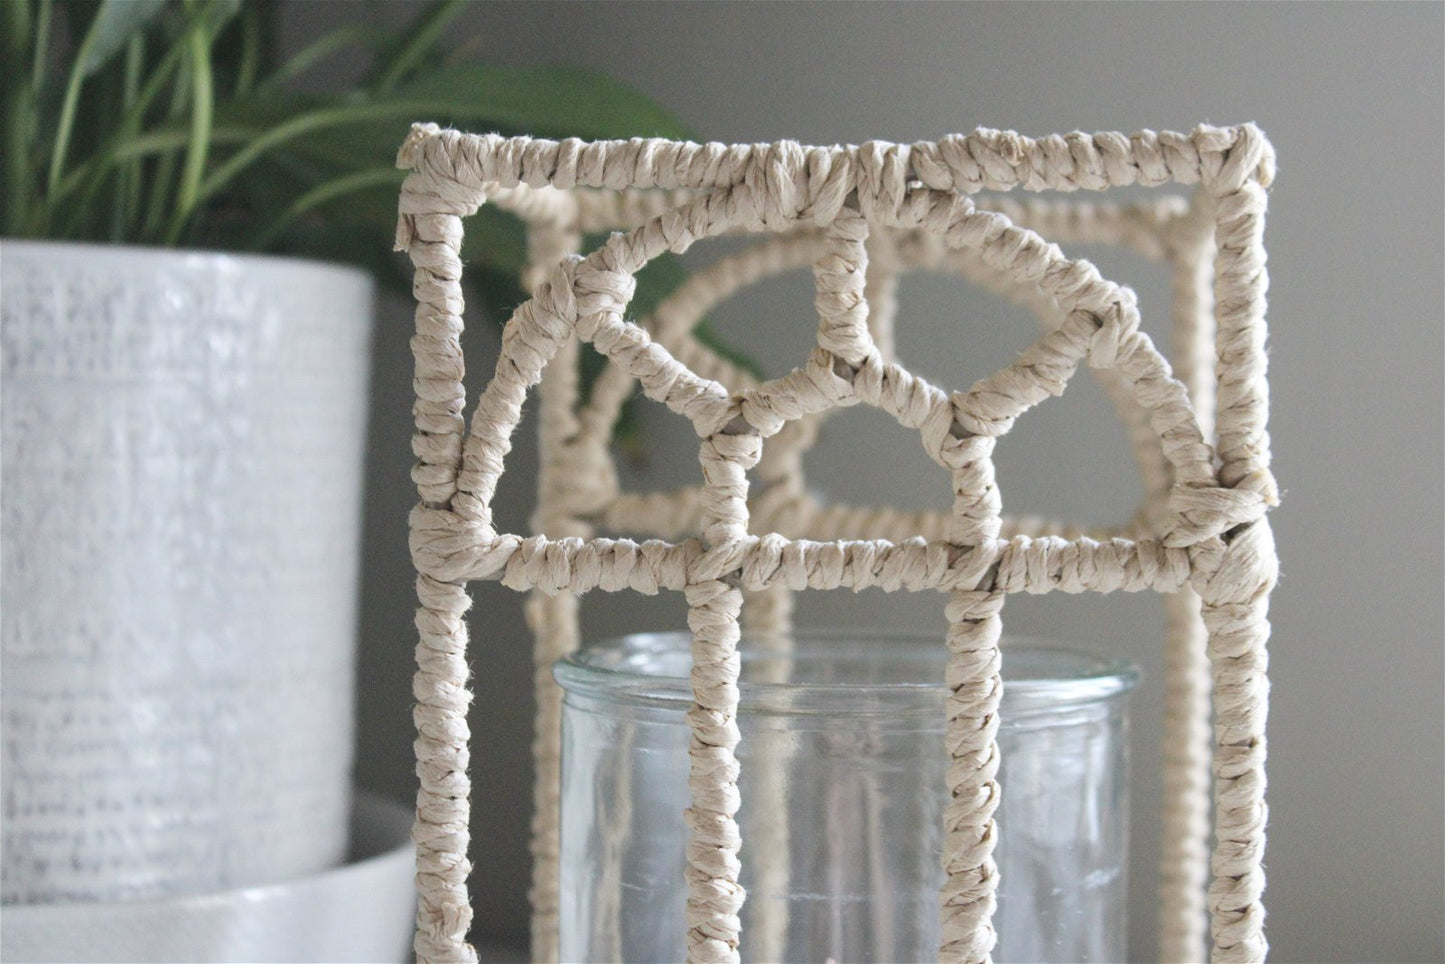 Window Candle Holder - a Cheeky Plant